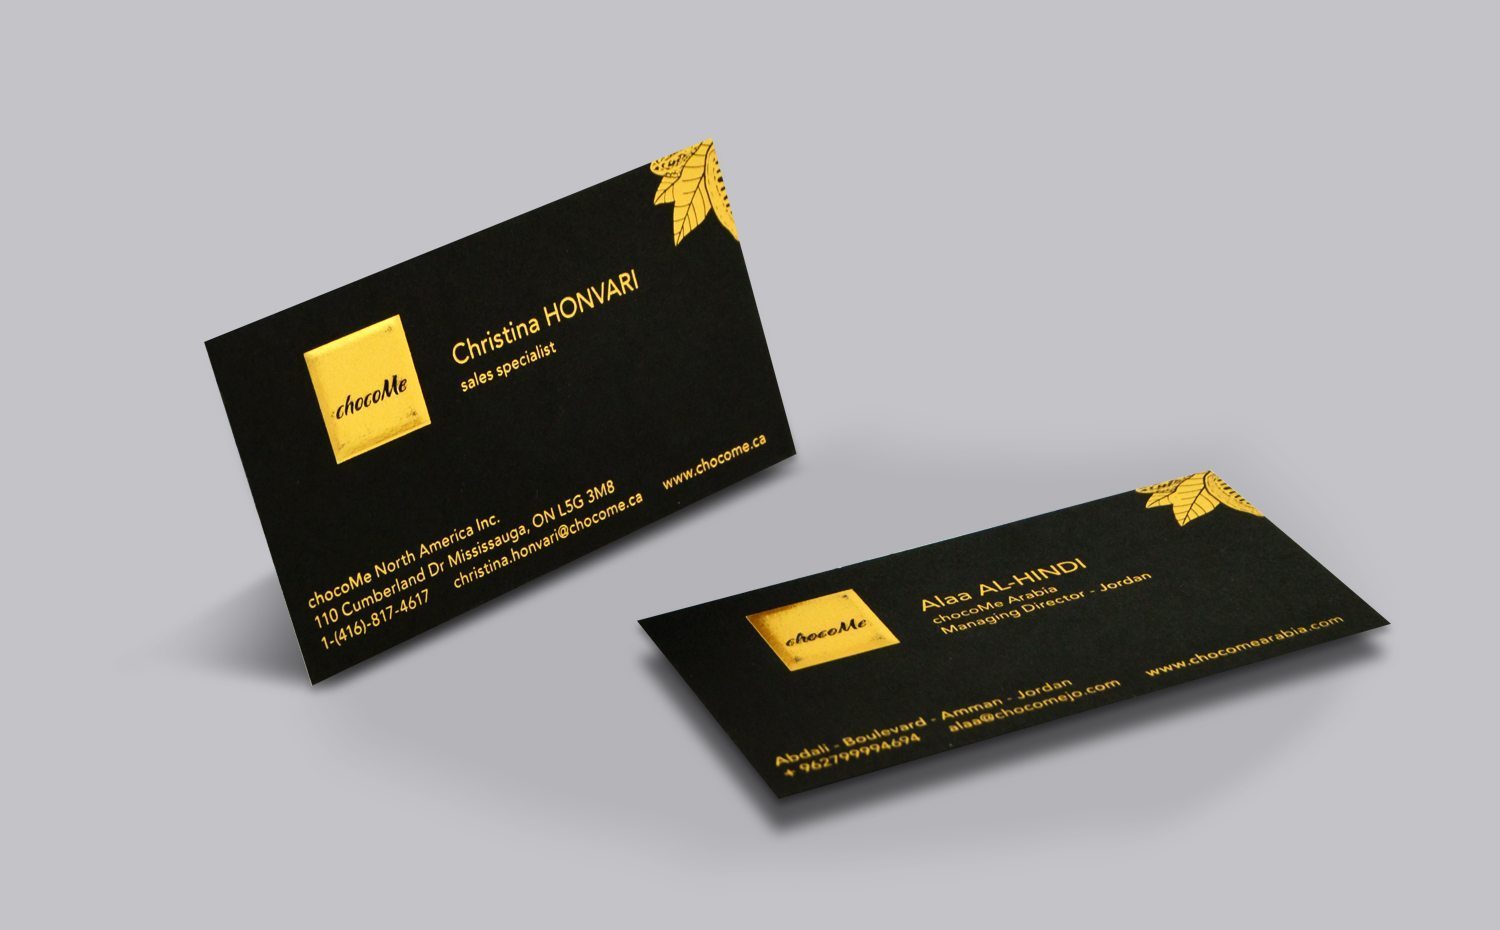 The Best Luxury Business Cards Printing According to Experts - Wow